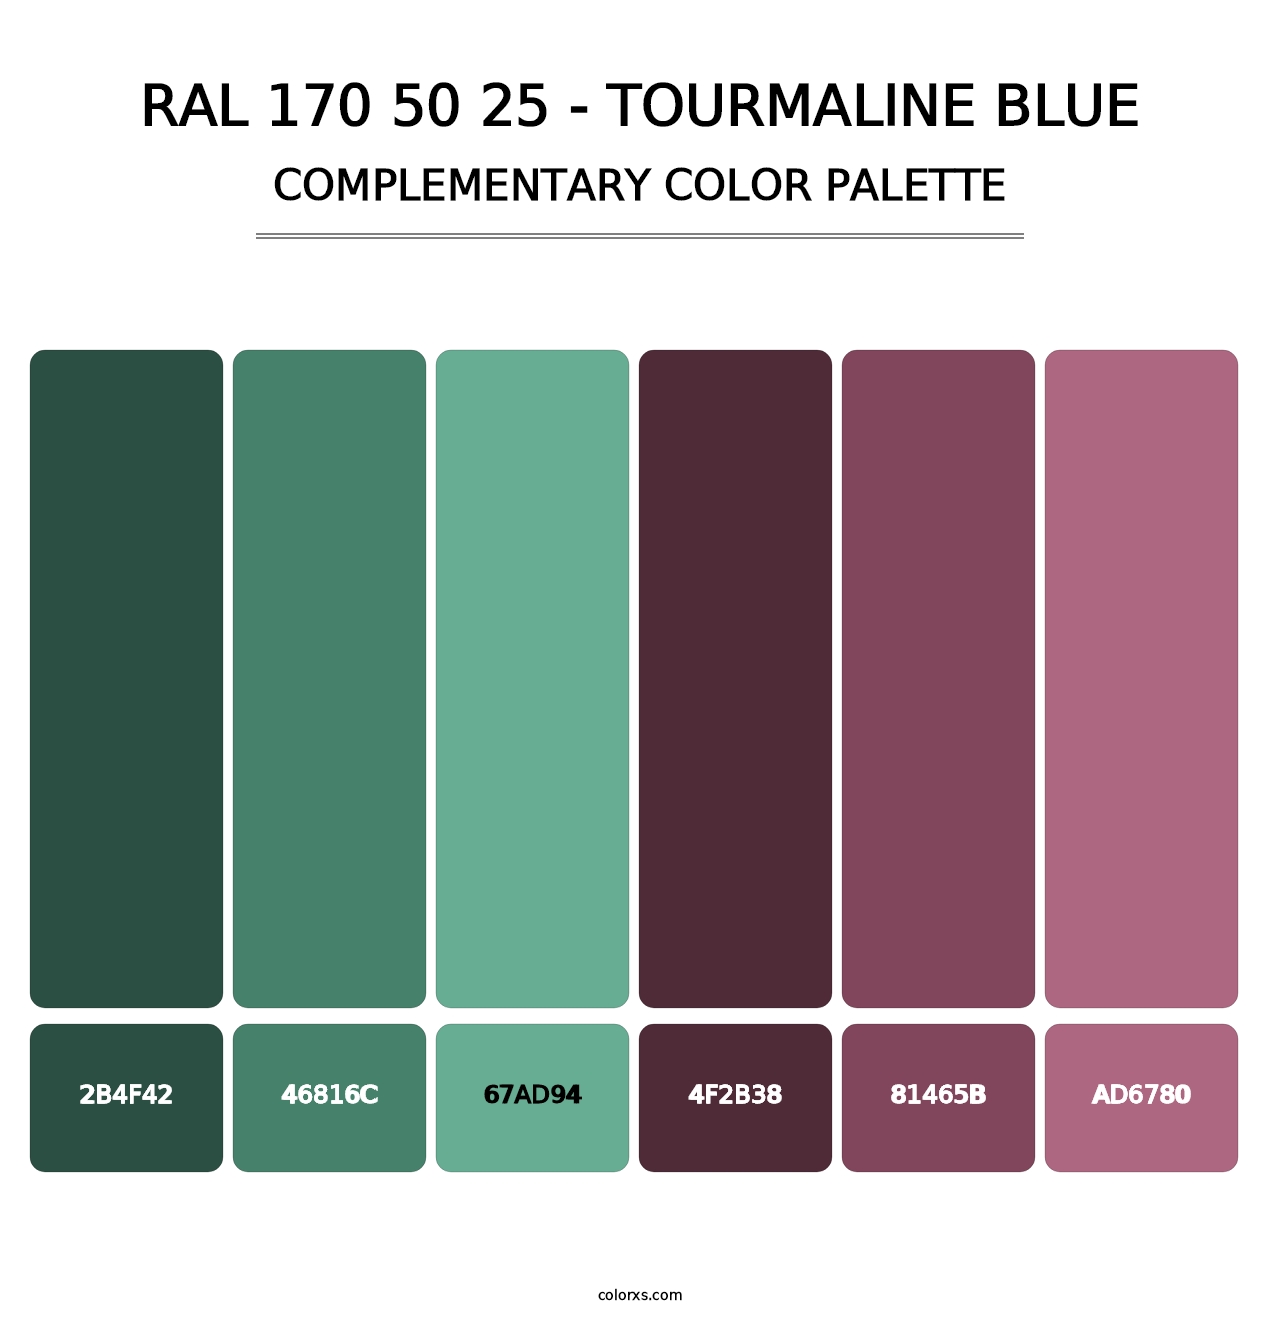 RAL 170 50 25 - Tourmaline Blue - Complementary Color Palette